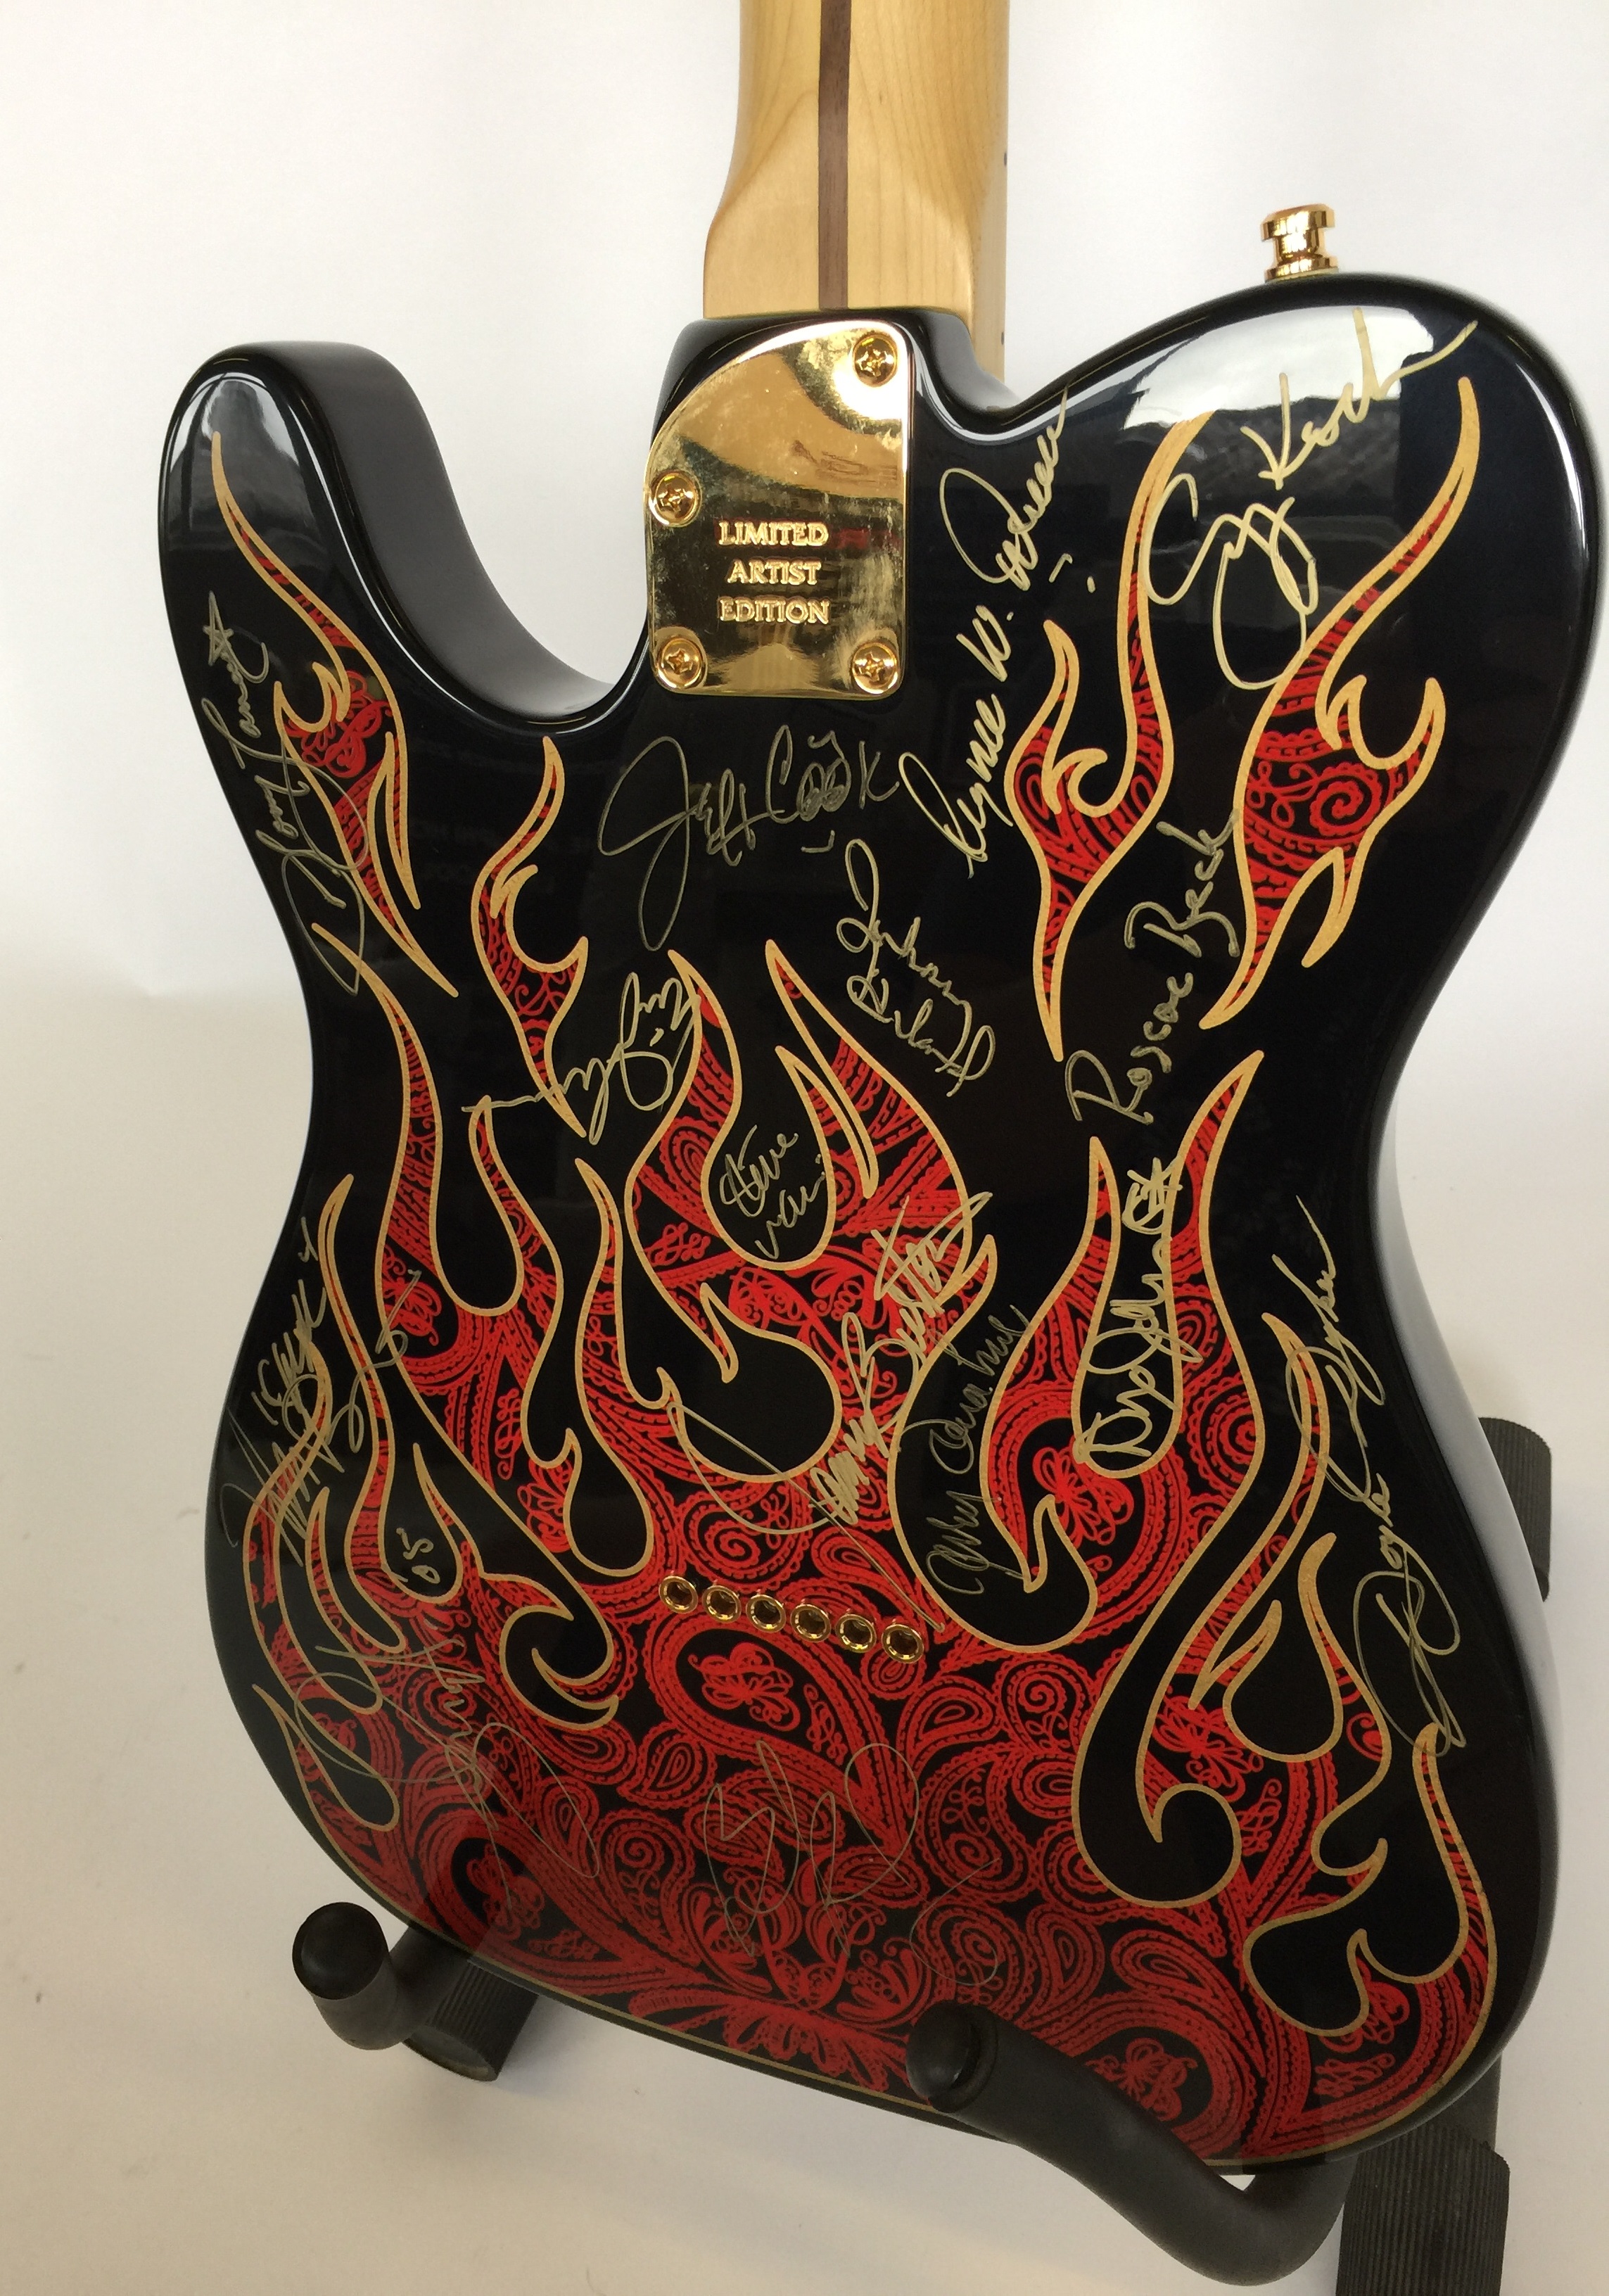 FENDER TELECASTER FLAME JAMES BURTON 1994 - limited artist edition that was gifted to Jerry Donahue - Image 4 of 7